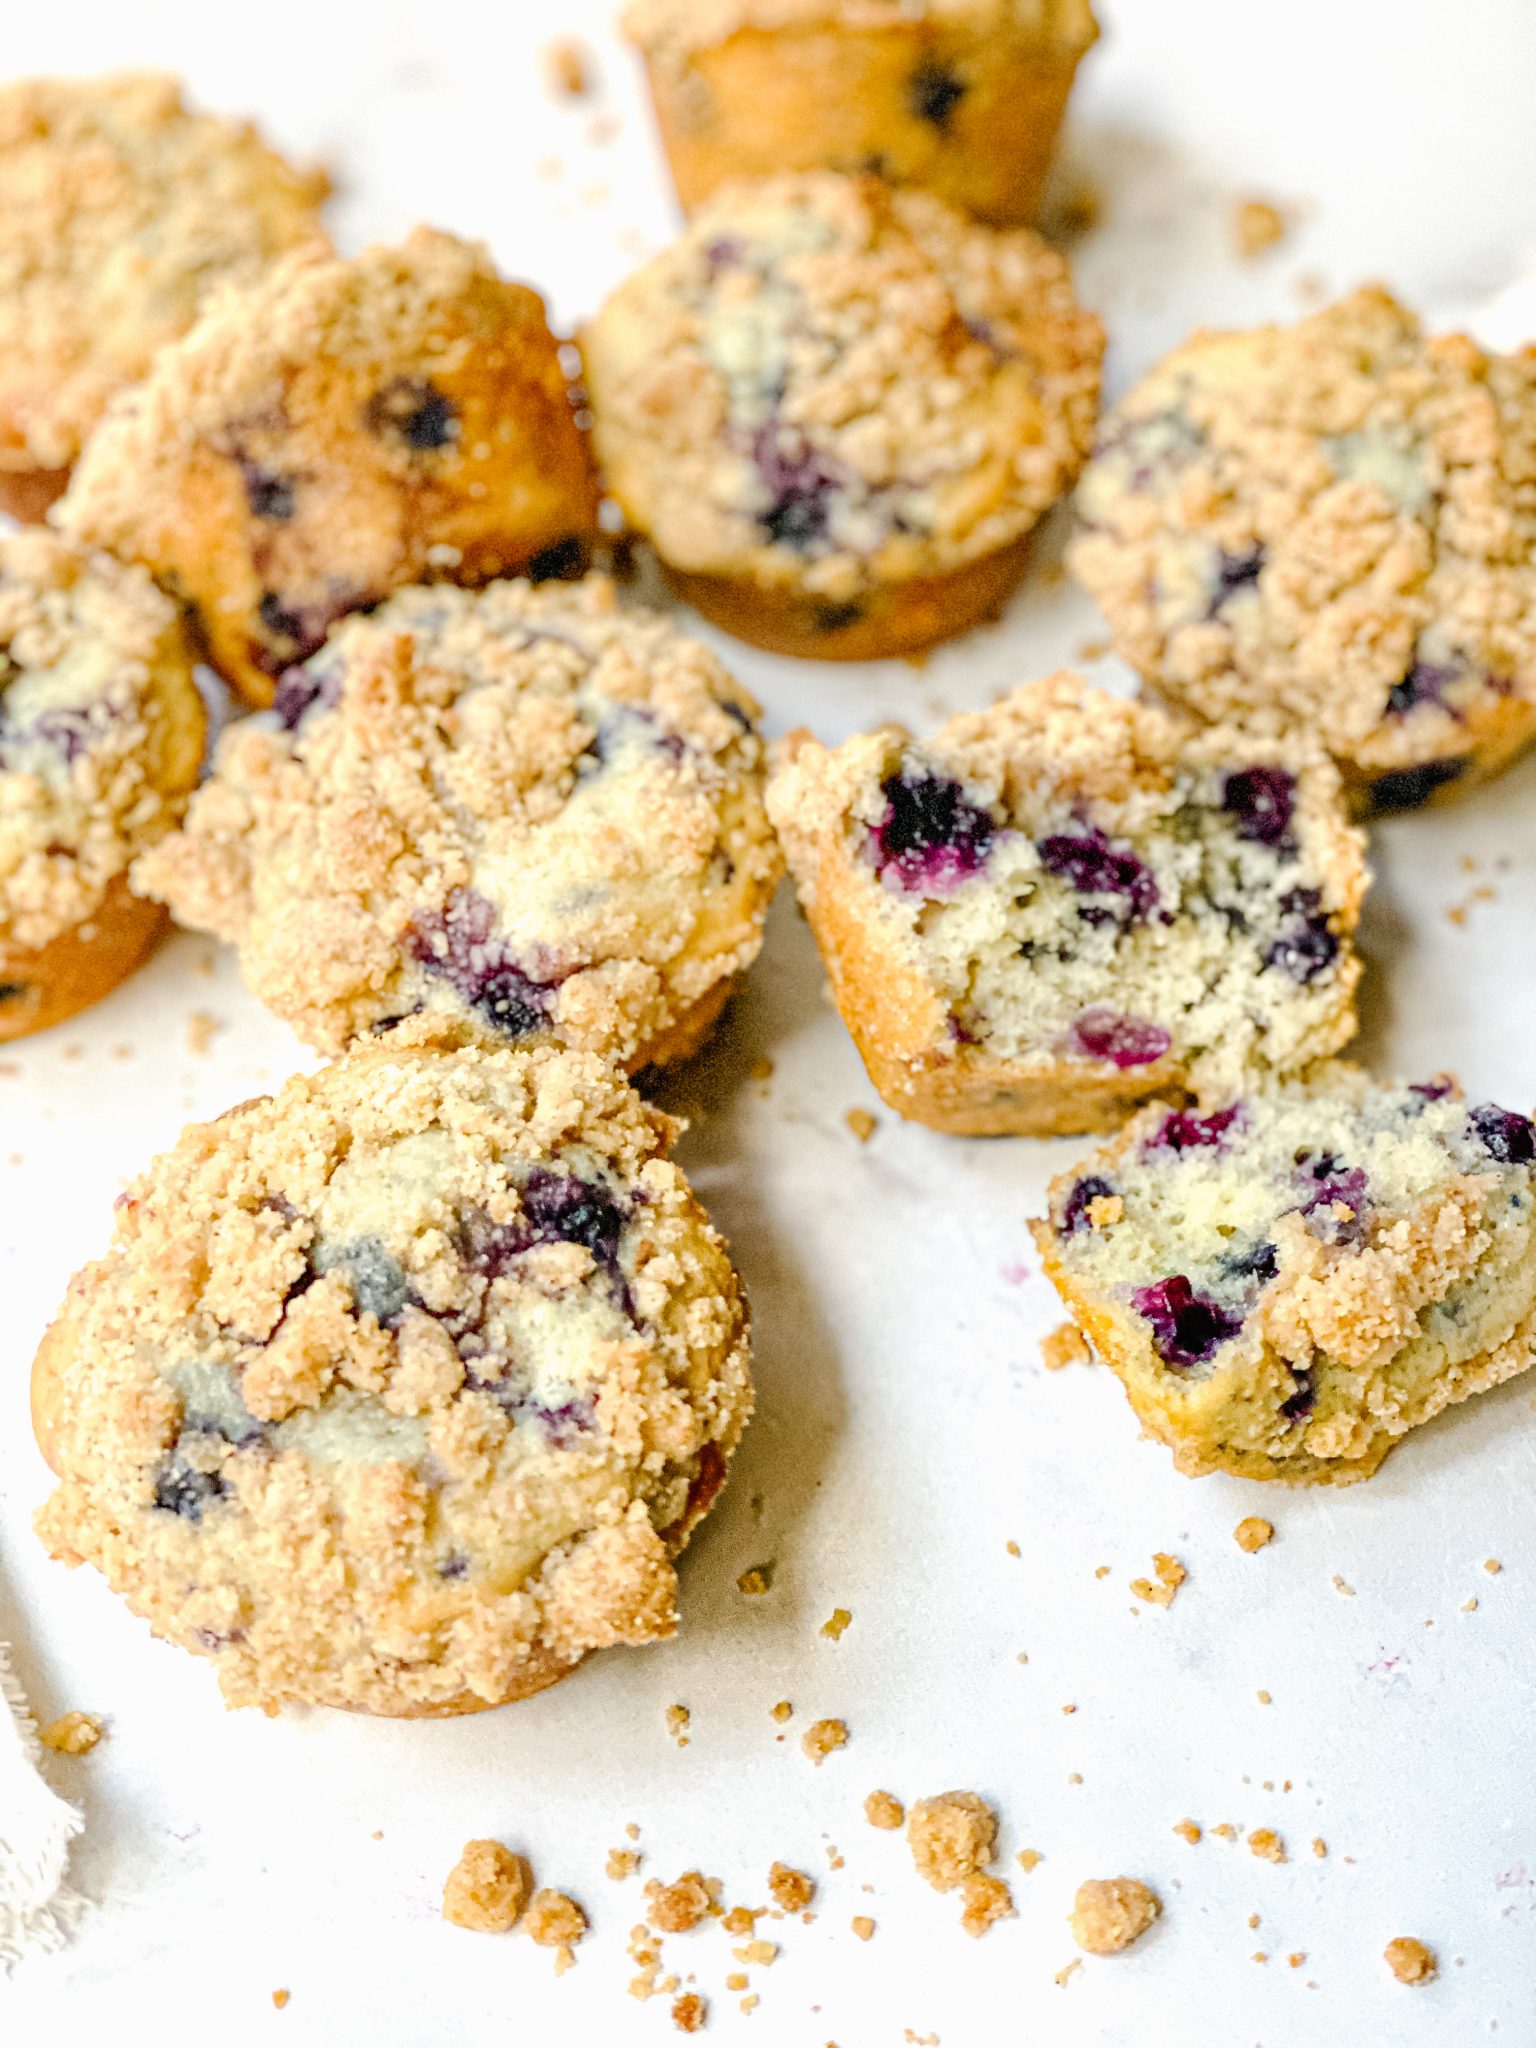 Cinnamon Crumble Top Blueberry Muffins - Plum Street Collective